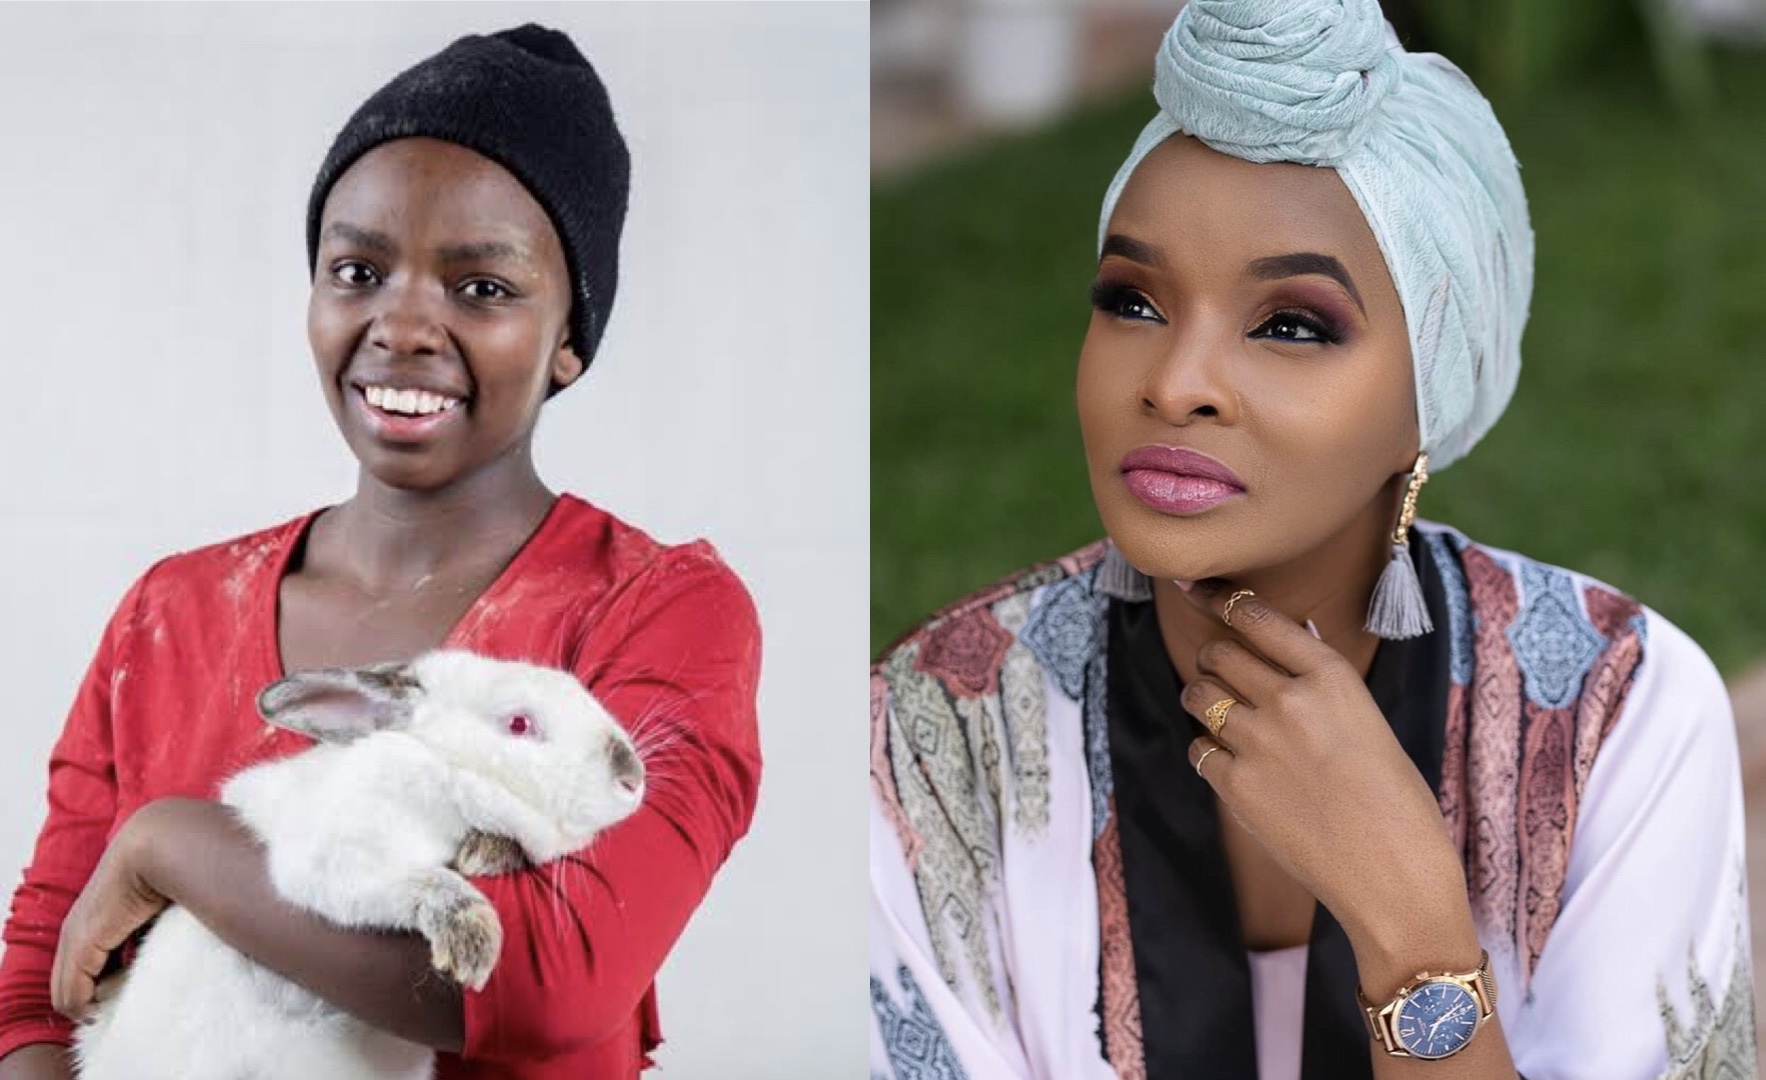 “You are destined for great heights” Lulu Hassan celebrates popular actress ‘Maria’ in heartfelt message